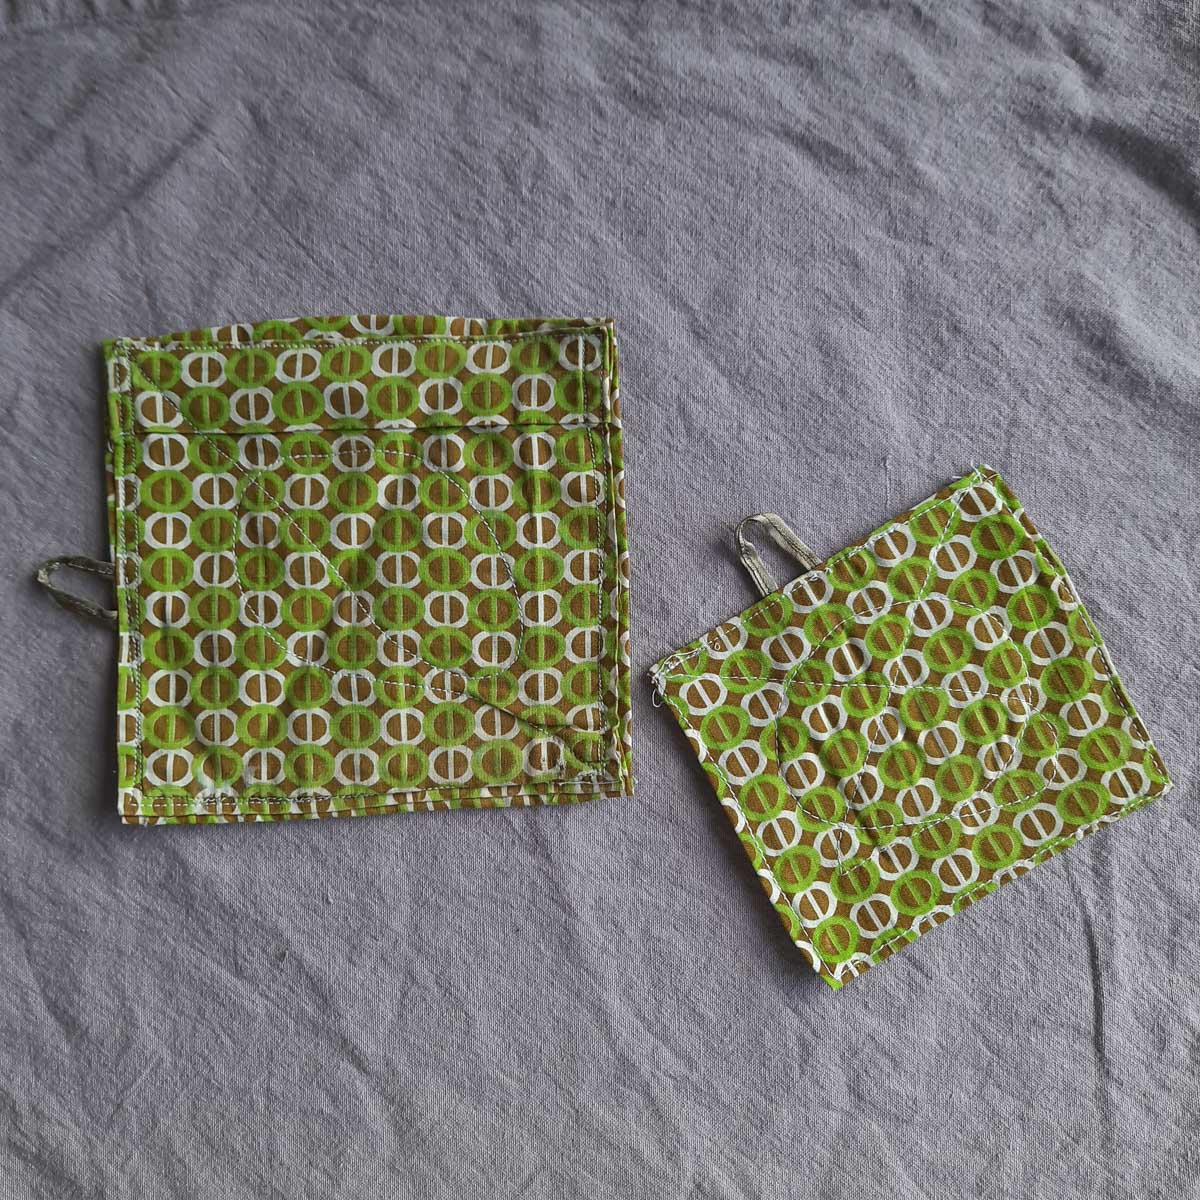 Two potholders from leftover materials